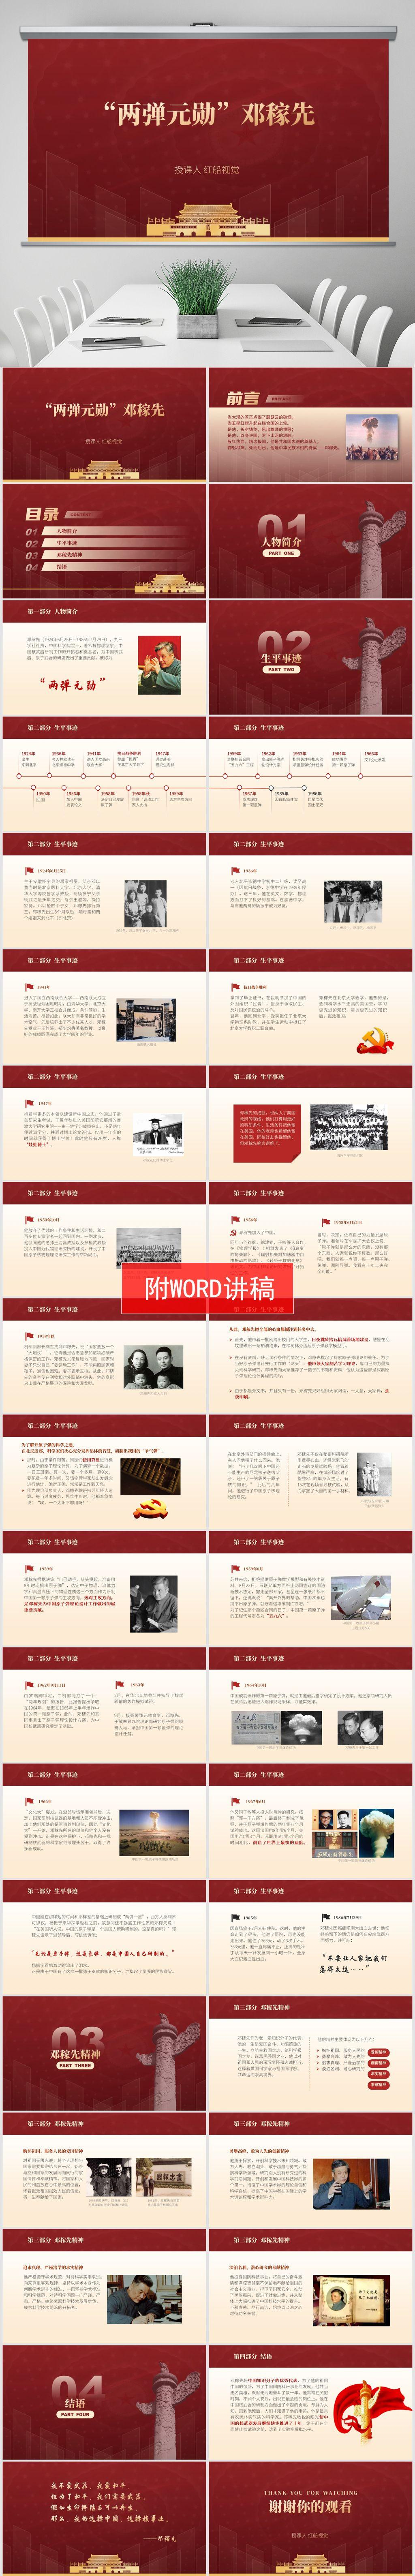 Deng Jiaxian's advanced deeds of scientists learning the ppt courseware of two bomb heroes